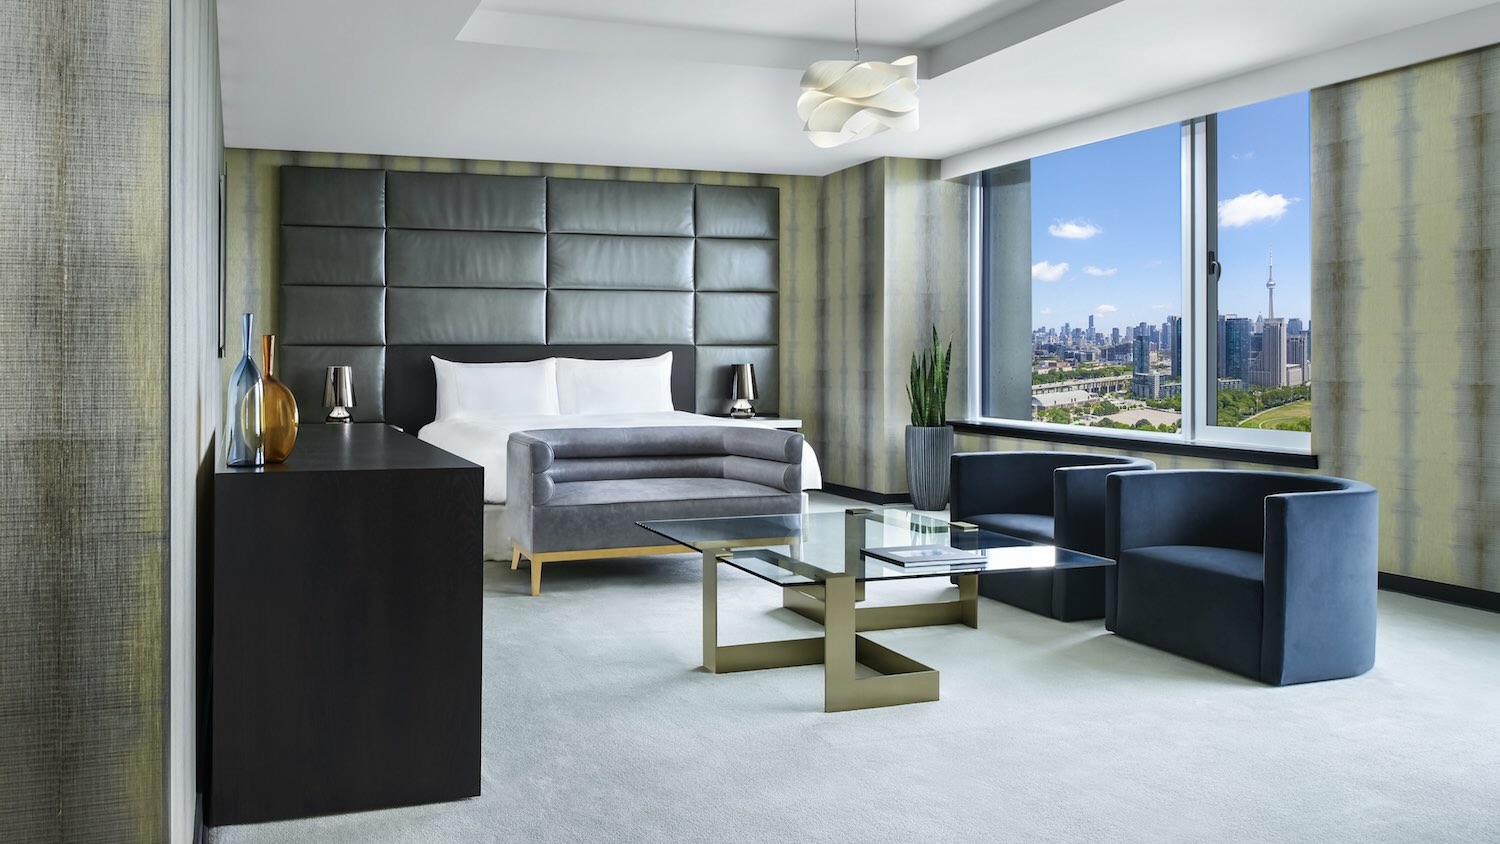 Canada’s largest city boasts plenty of classy places to stay… read Bryan Dearsley's list of the best 5-star hotels in Toronto to find out more